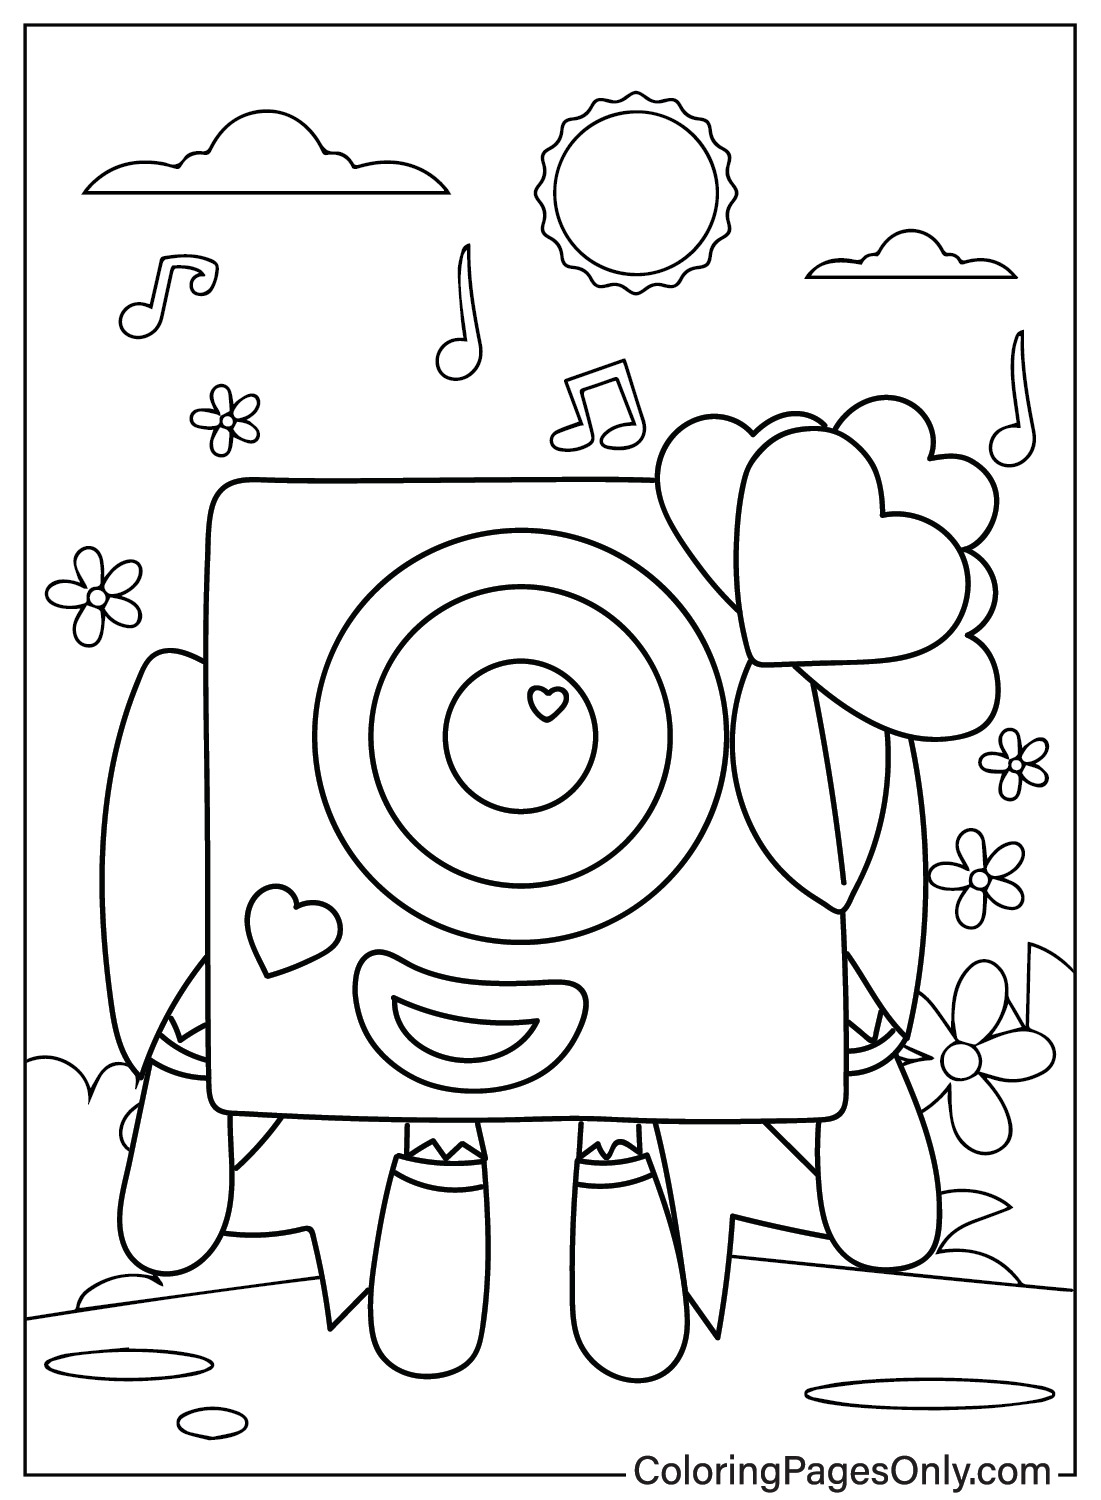 Coloring pages only on x ð numberblocks coloring pages ðï httpstcowamwenay numberblocks learn play numbers coloringpagesonly coloringpages coloringbook art fanart sketch drawing draw coloring usa trend trending trendingnow